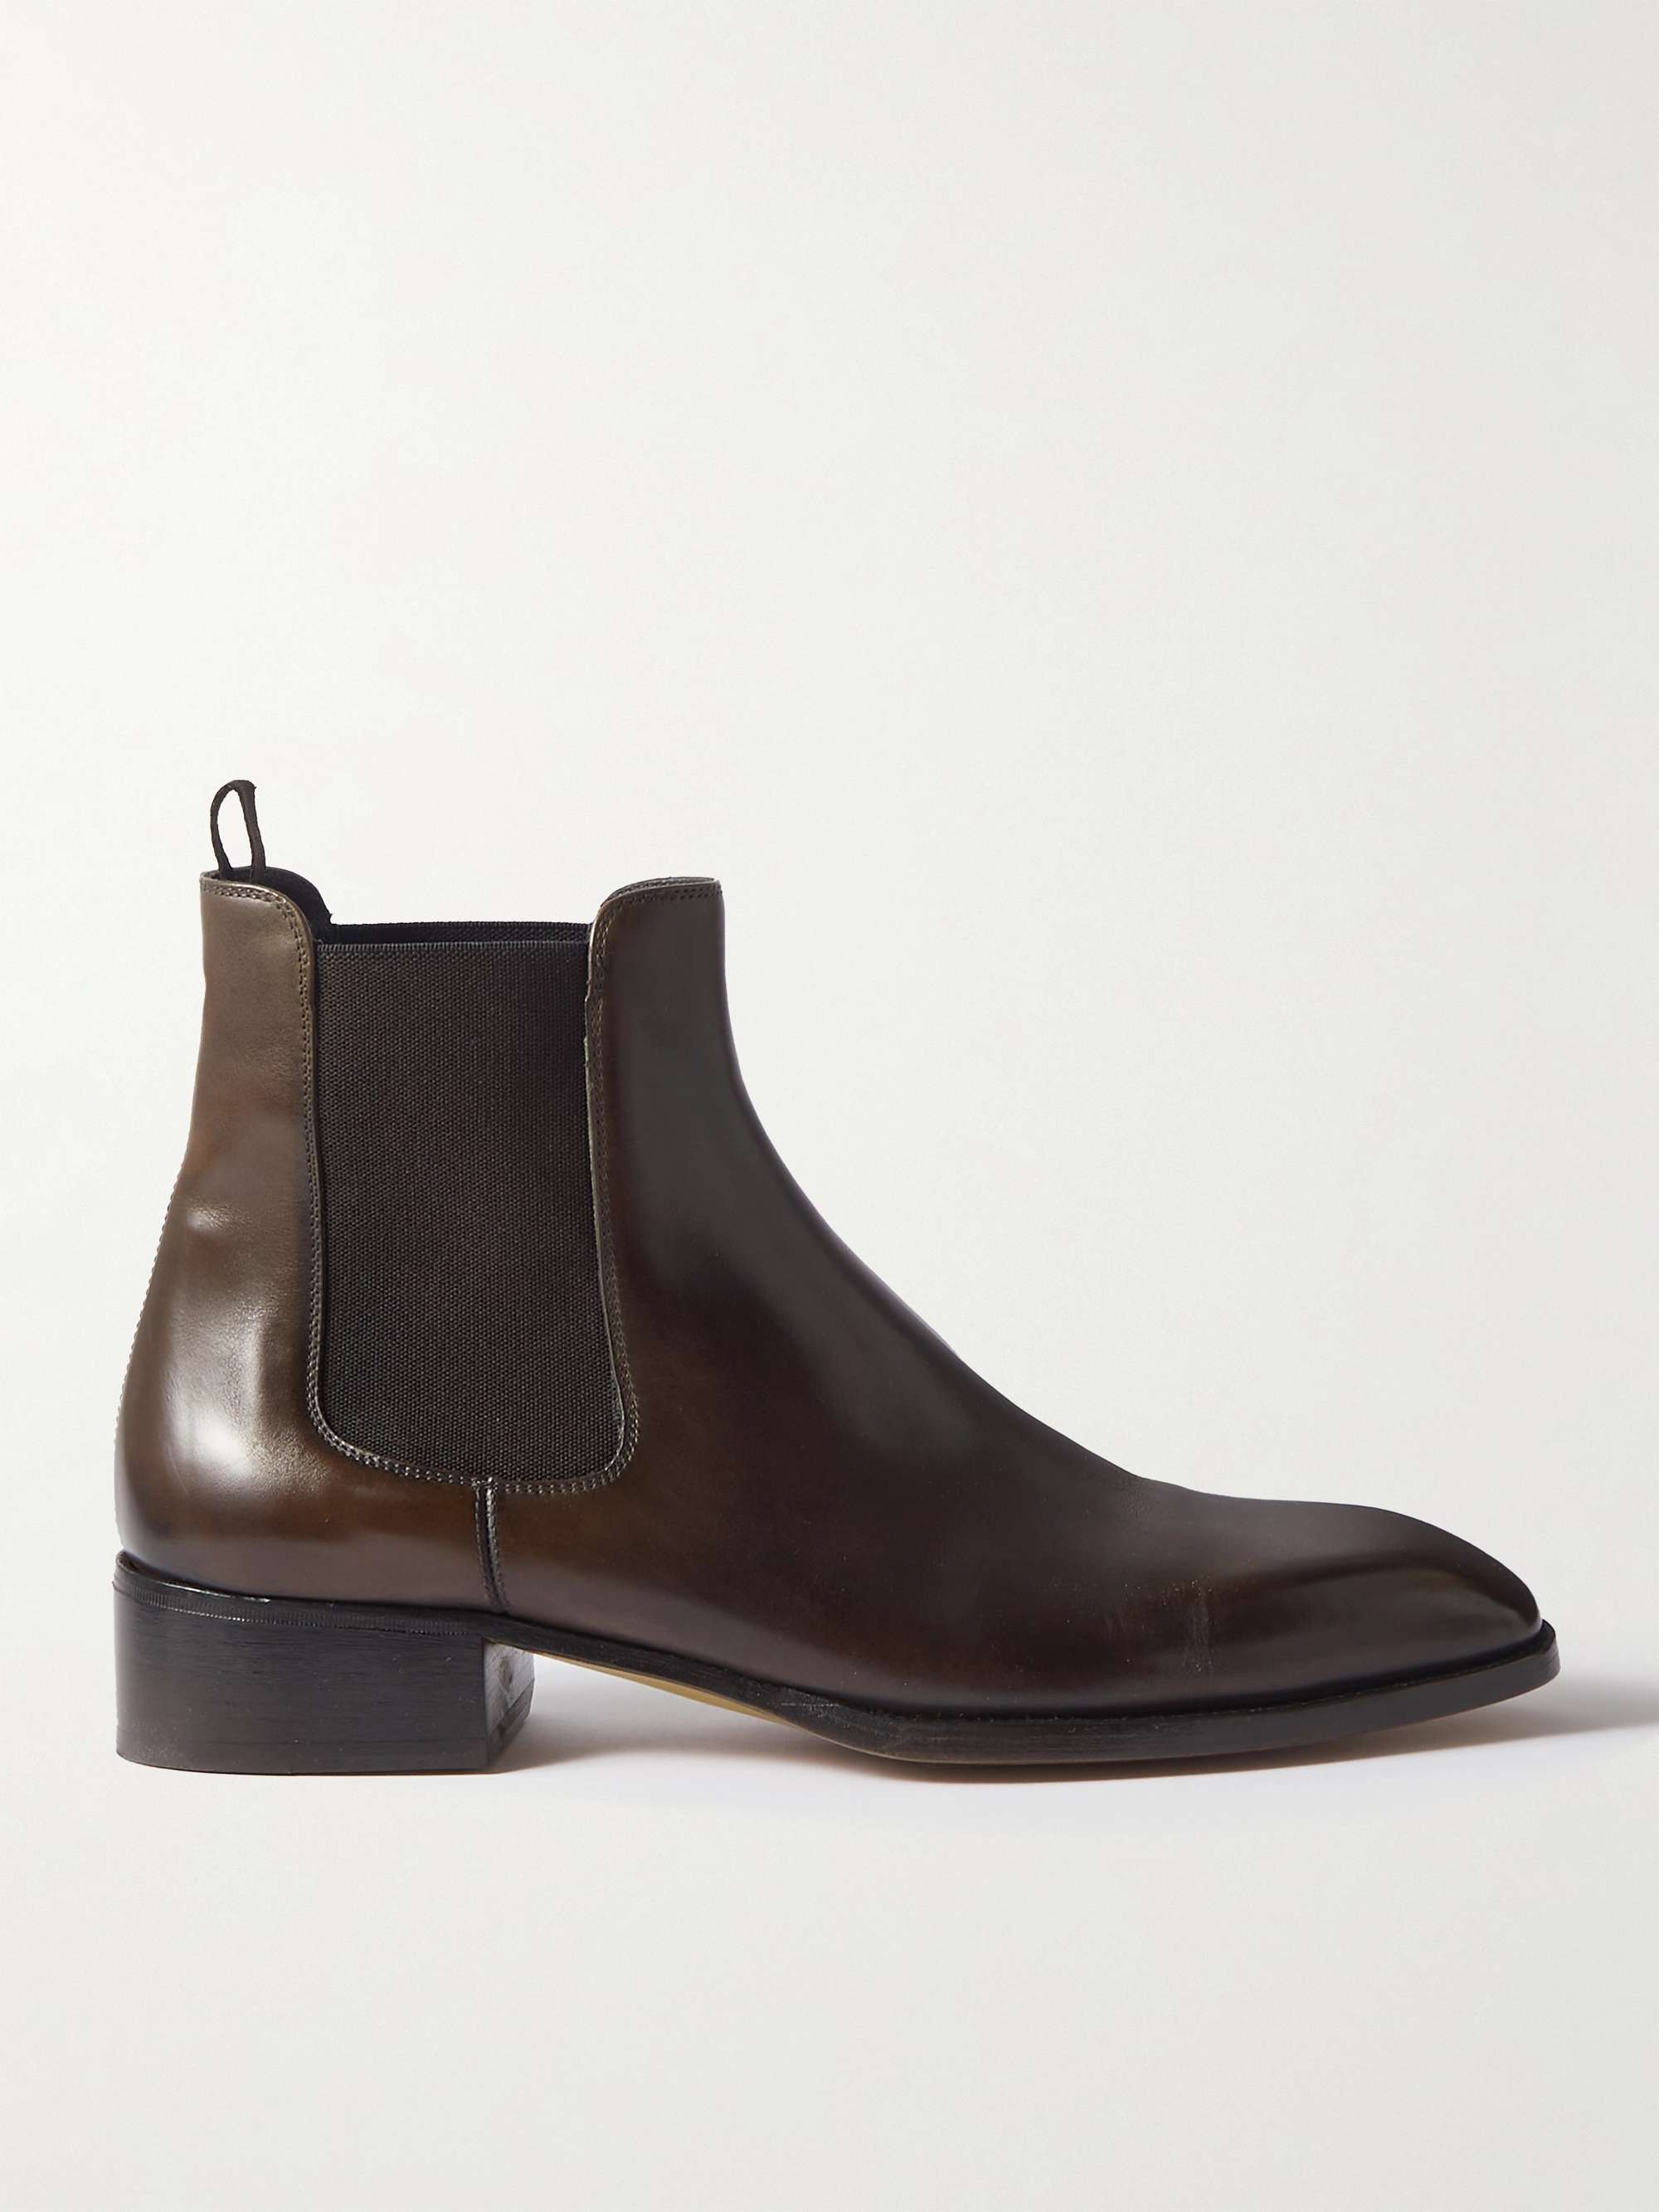 TOM FORD Leather Chelsea Boots | MR PORTER